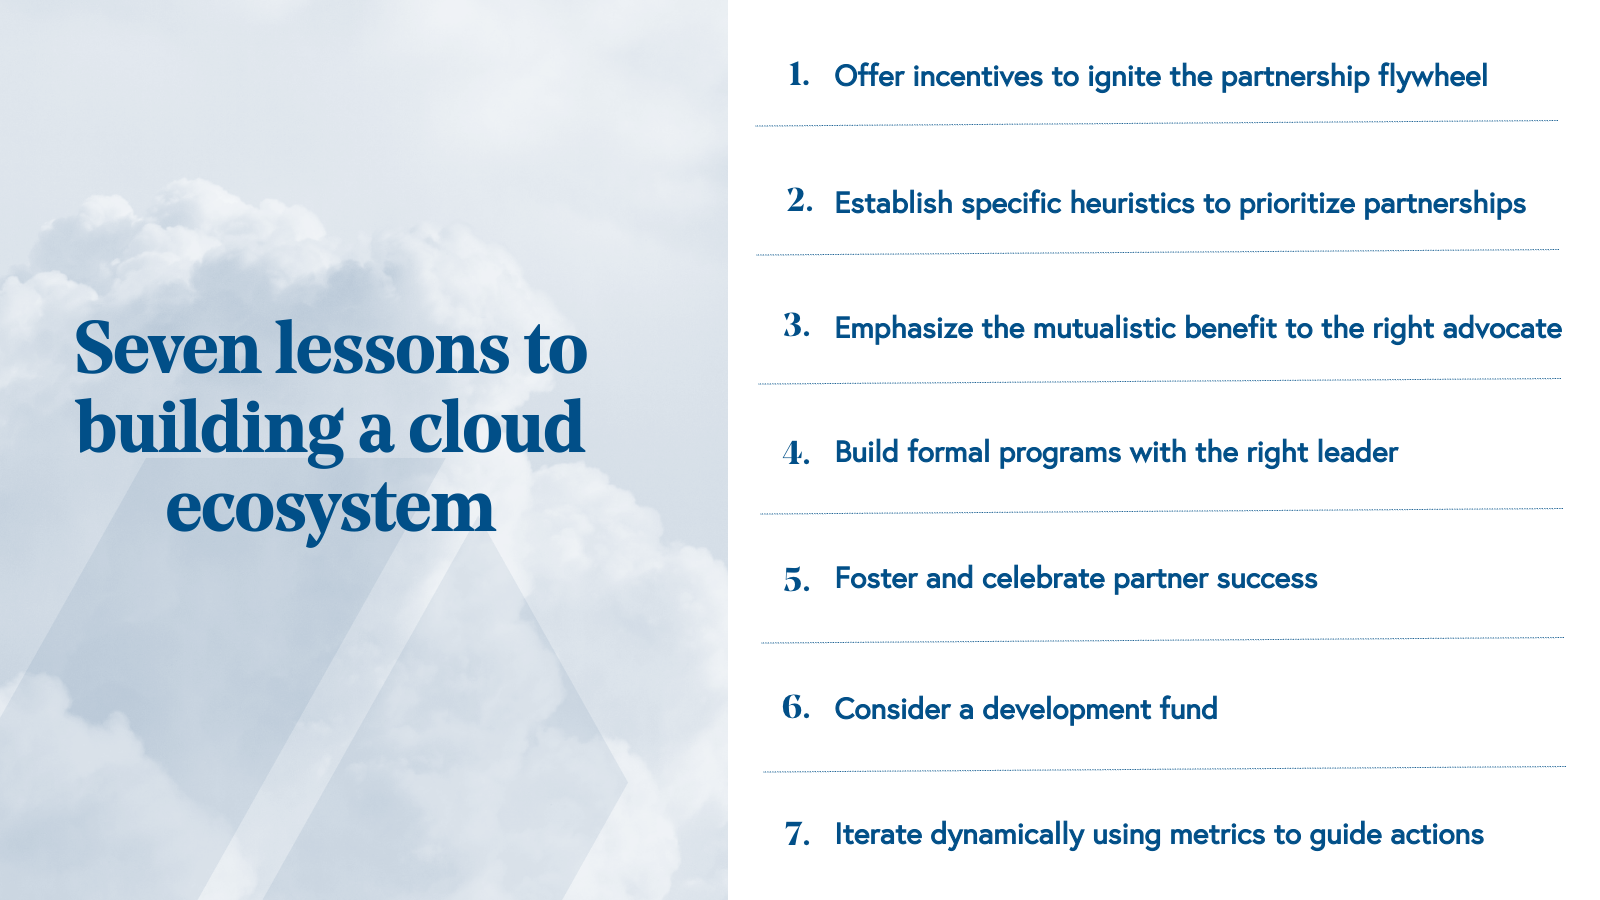 Seven lessons to building a cloud ecosystem